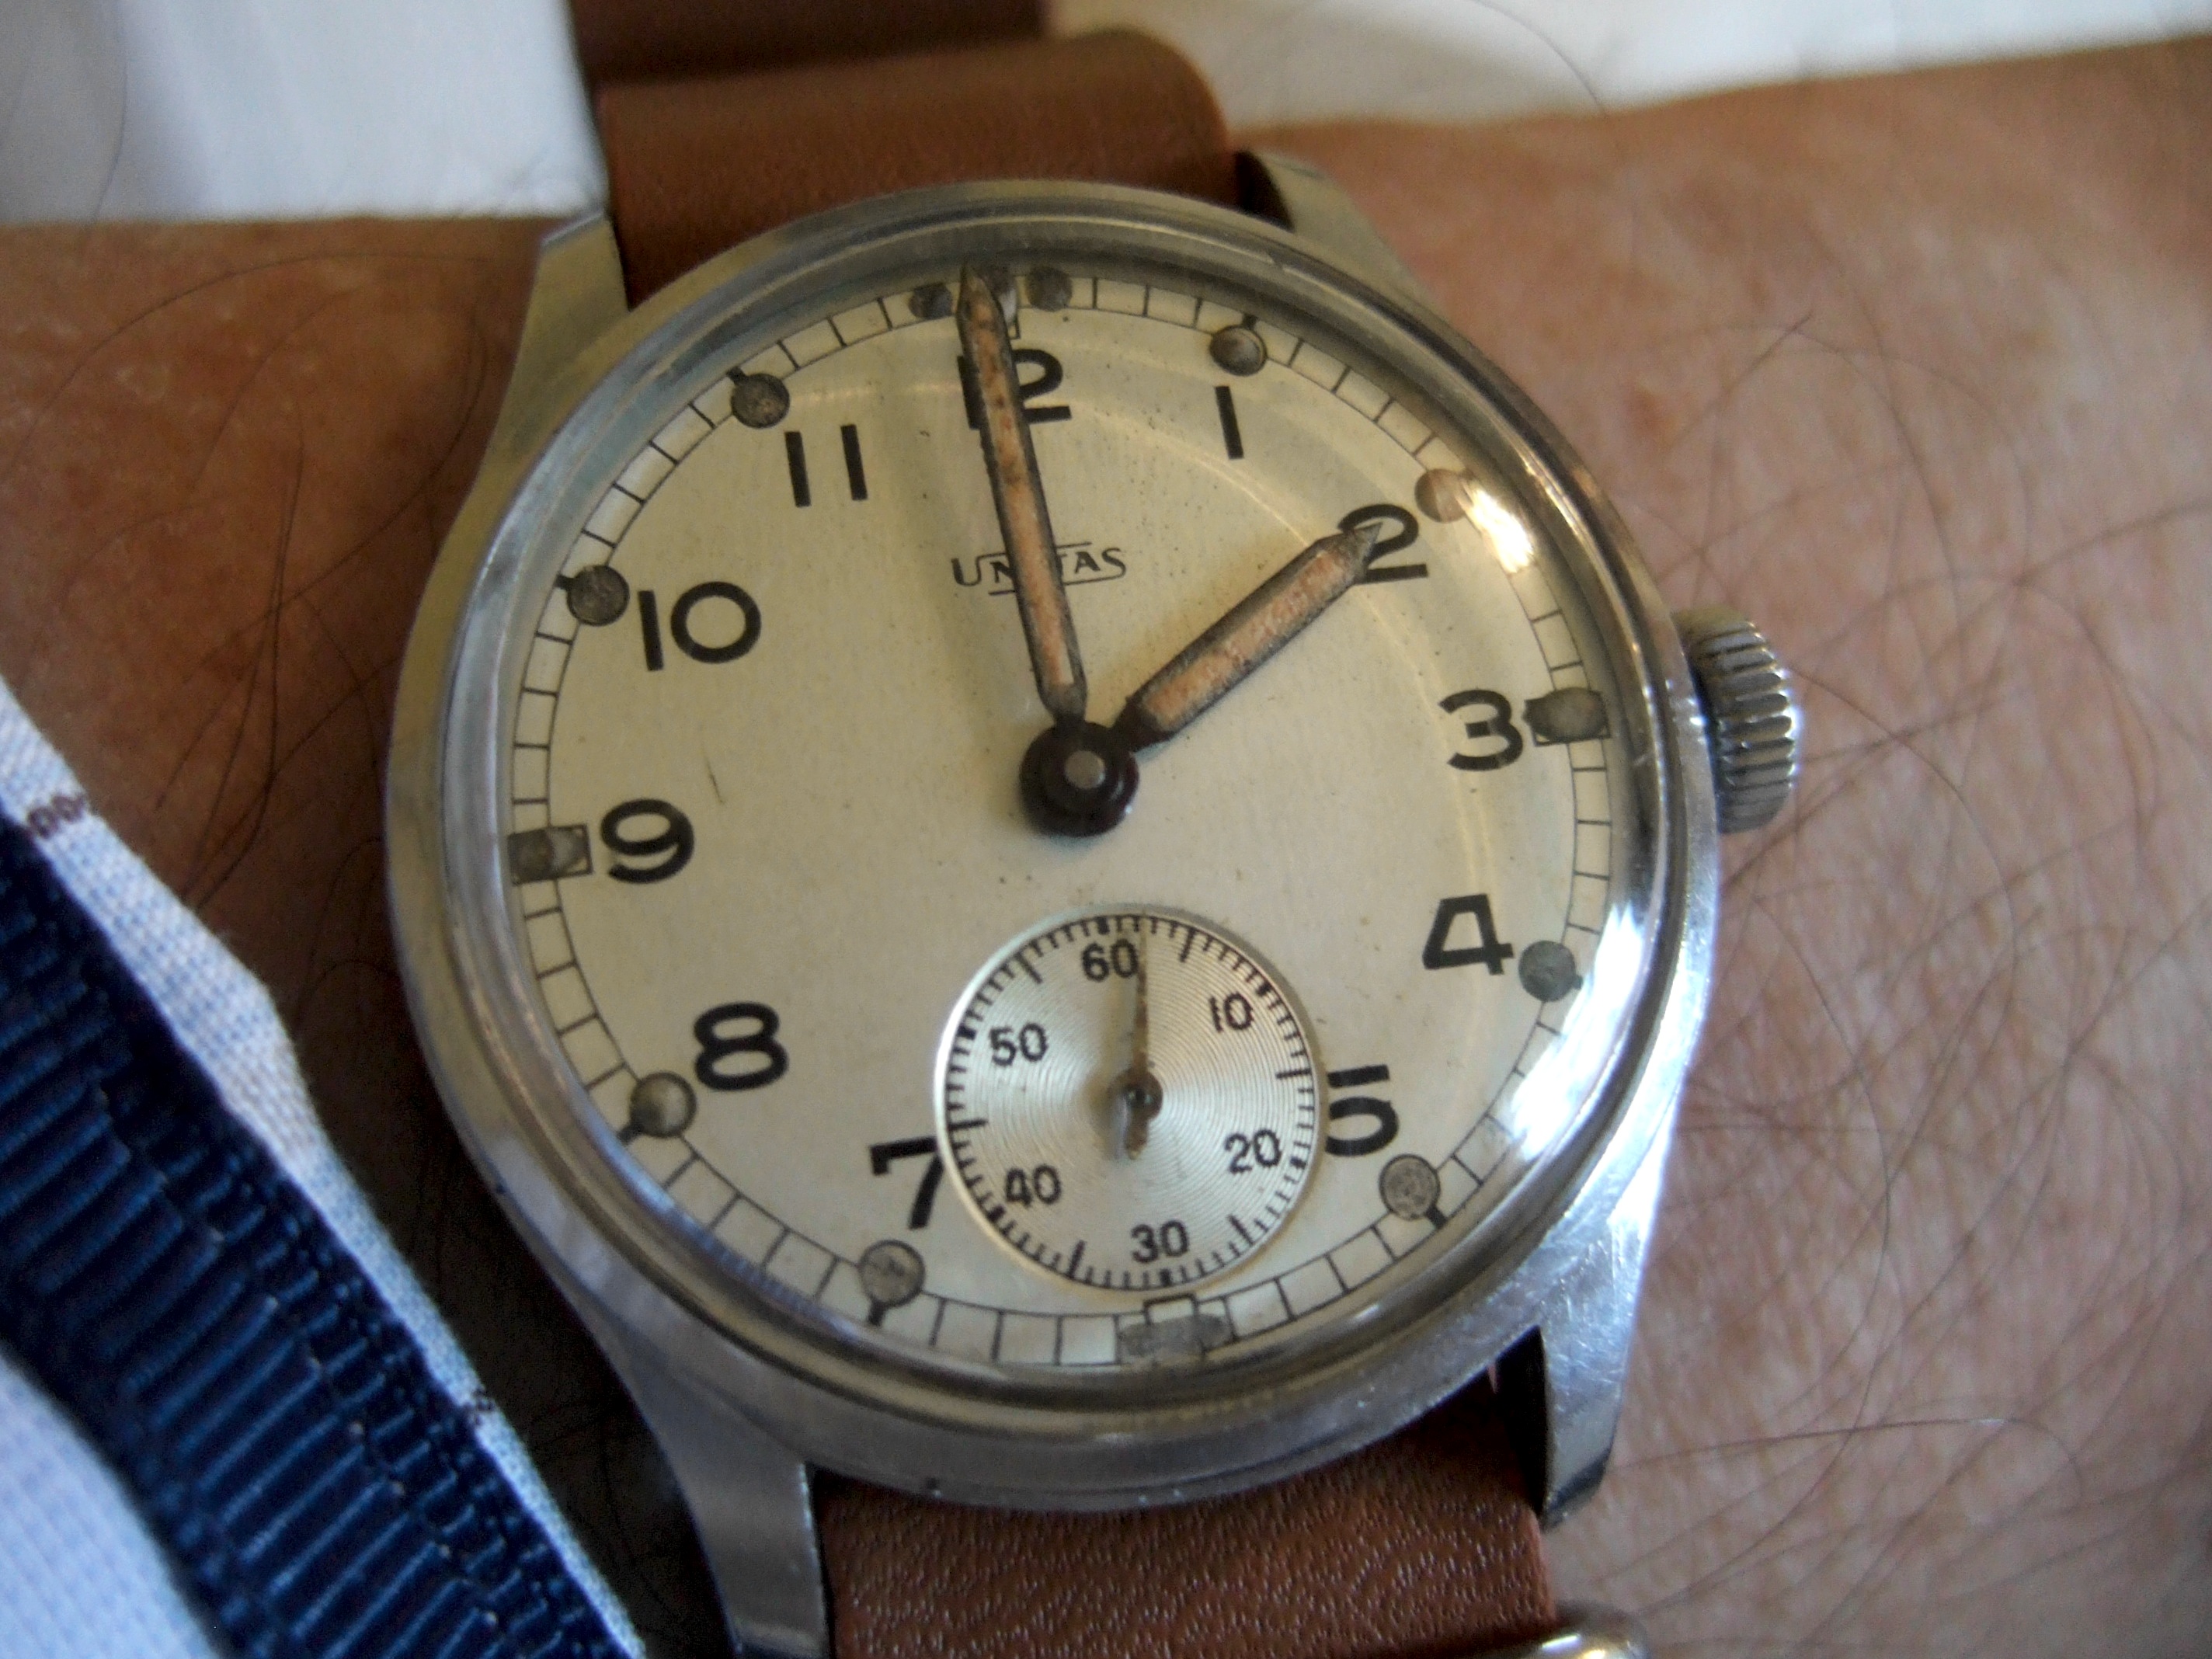 Interesting A.T.P Unitas WW2 watch on eBay - Chat About Watches and The Industry Here